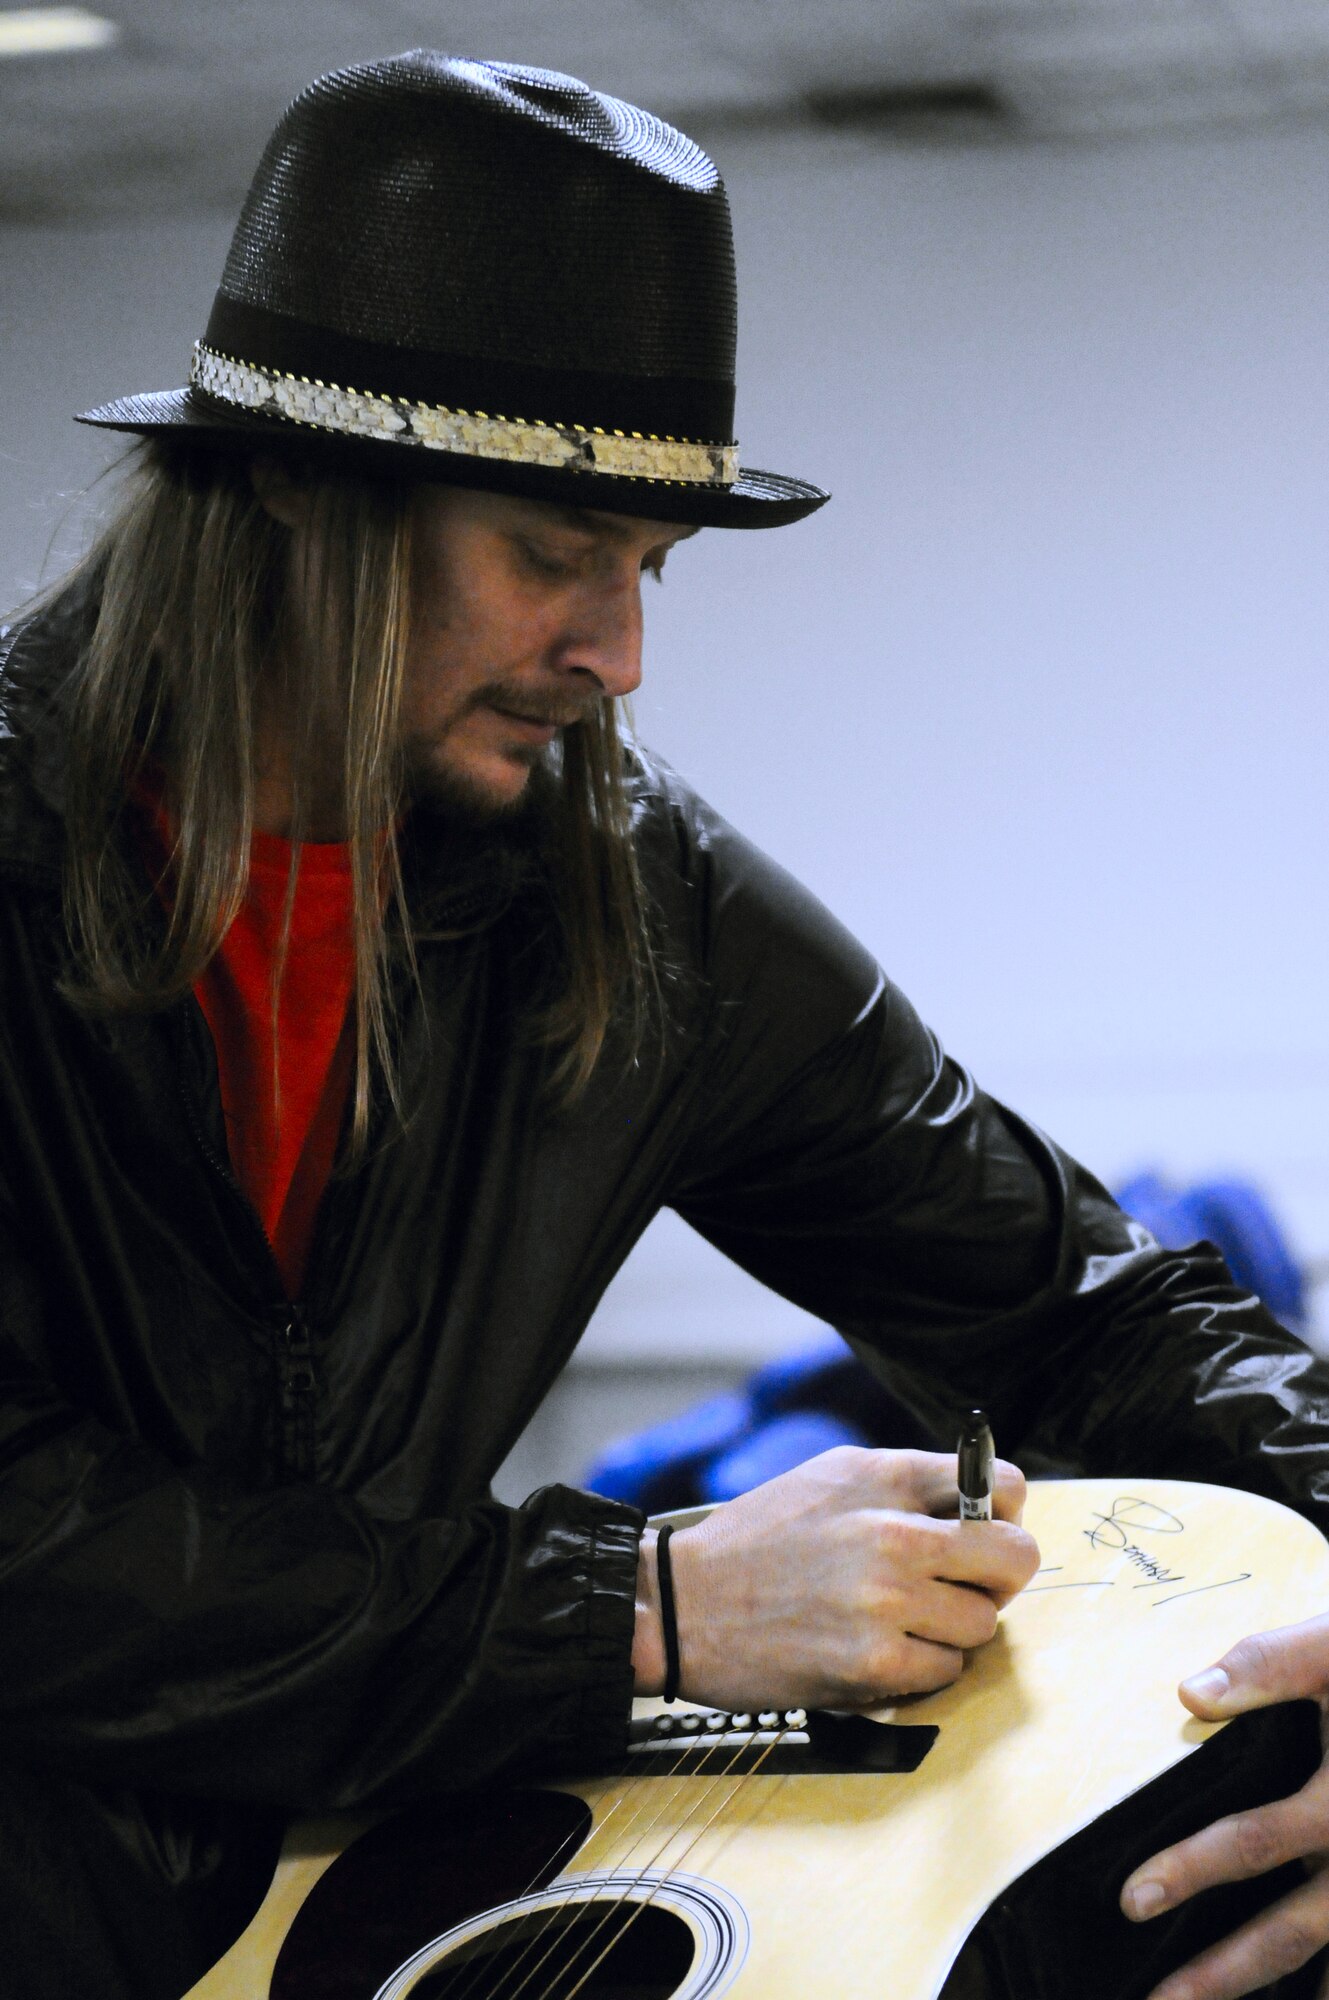 Kid Rock autographs an Airman's guitar while touring different units Nov. 30, 2009, at Incirlik Air Base, Turkey. Kid Rock and the Twisted Brown Truck Band, singer/songwriter Jessie James and comedian Carlos Mencia kicked off the tour making Incirlik their first stop to thank the troops. The three entertainers visited various places around the base including the 39th Security Forces Squadron, Incirlik’s American Forces Network studio and the 39th Force Support Squadron before putting on a free concert for members of the Incirlik community. (U.S. Air Force photo/Staff Sgt. Raymond Hoy)